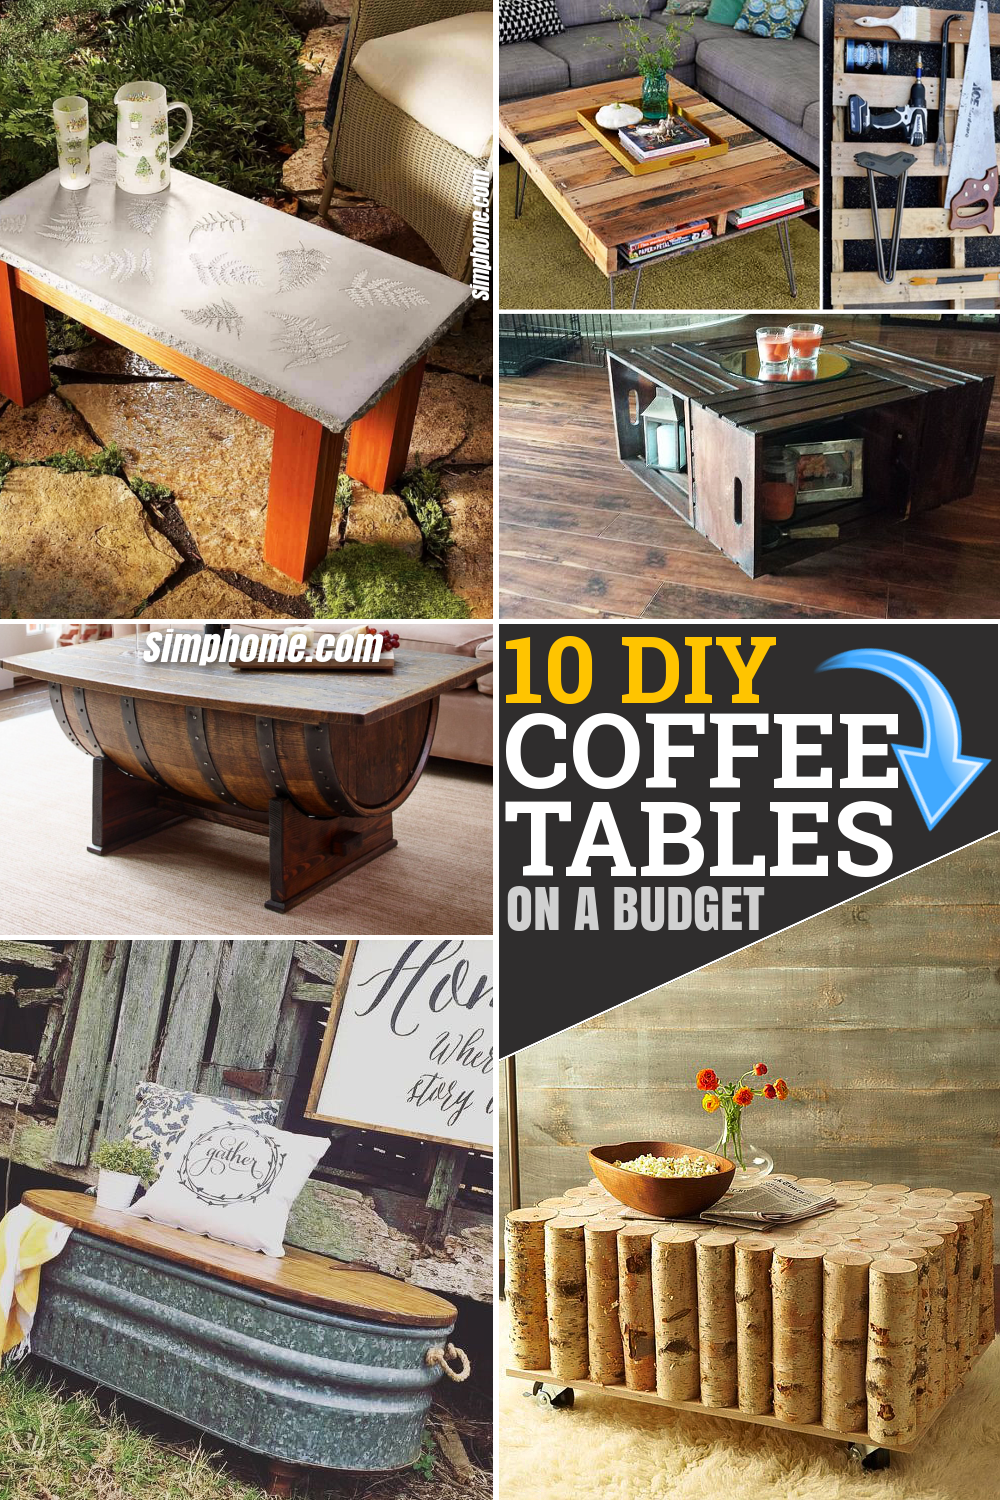 10 DIY Coffee Table on a Budget via Simphome.com Pinterest Featured image